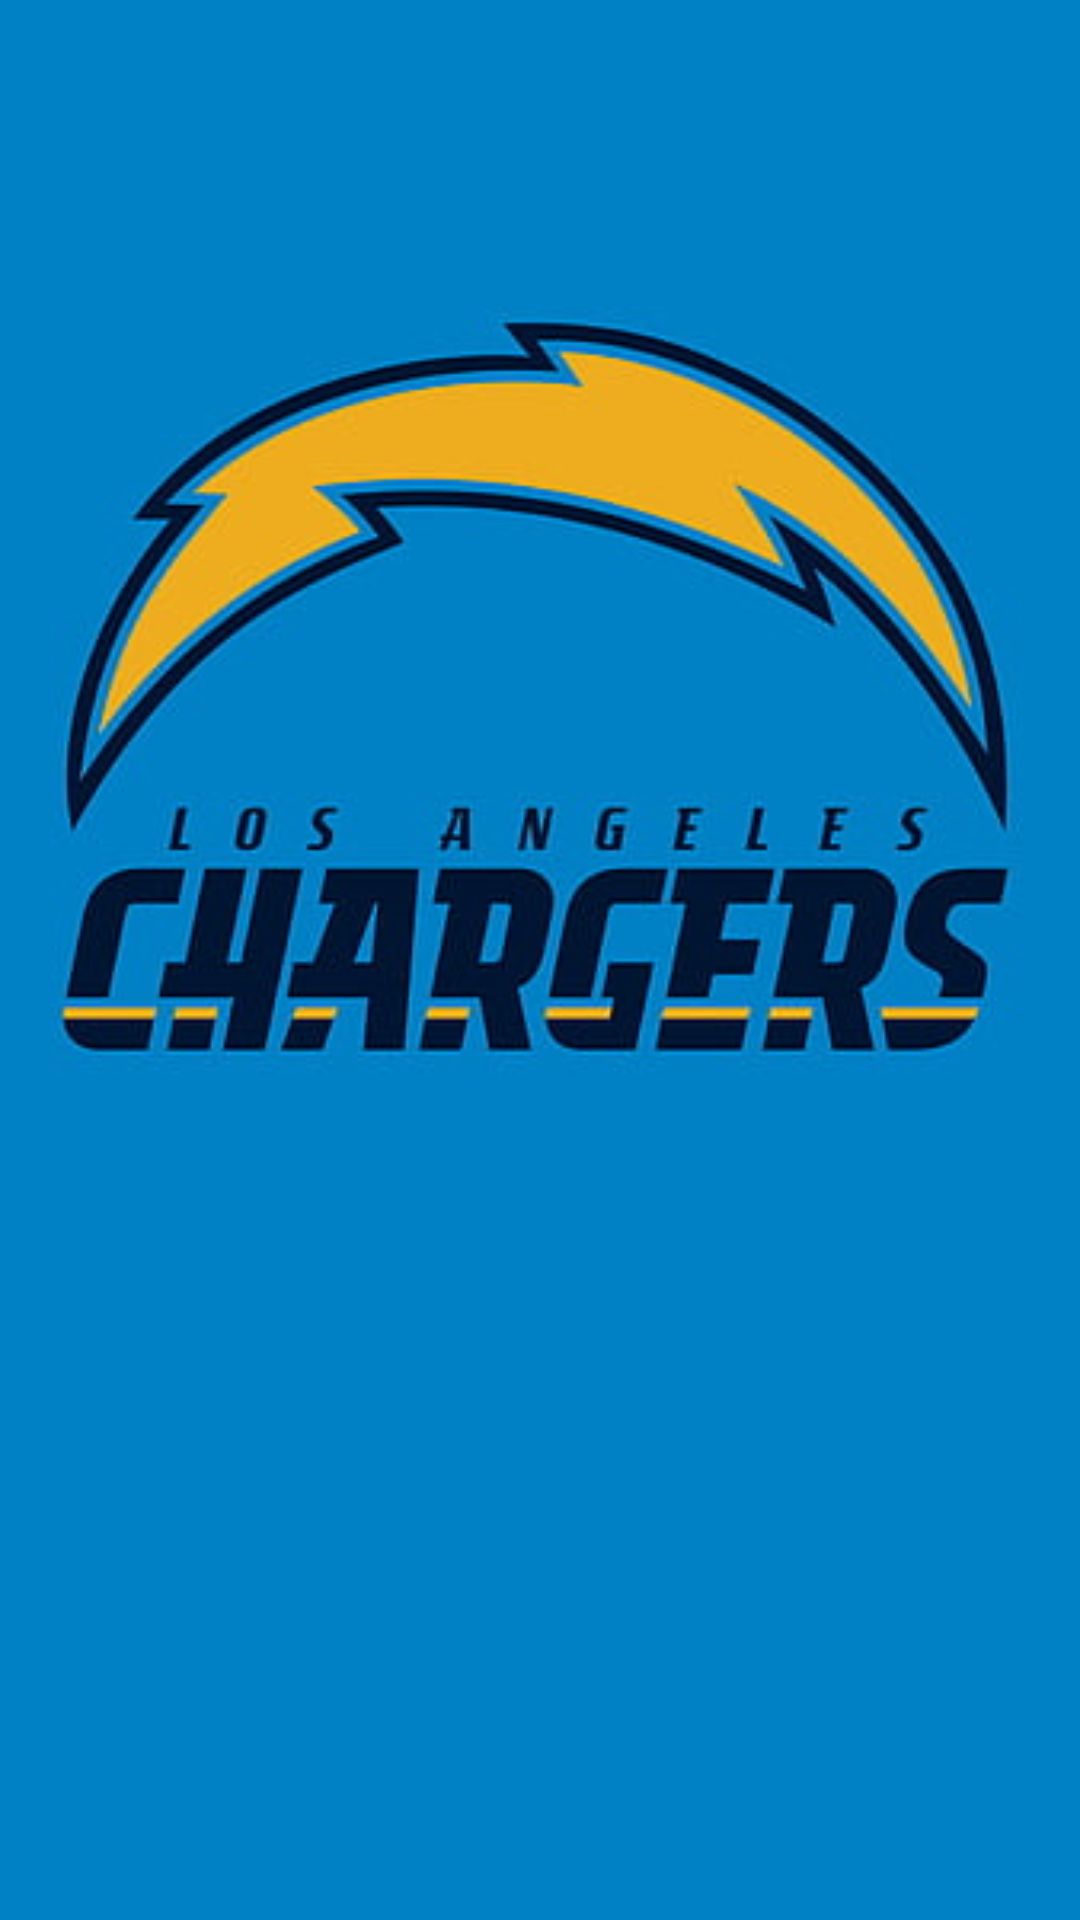 Los Angeles Chargers Logo Mobile Wallpaper